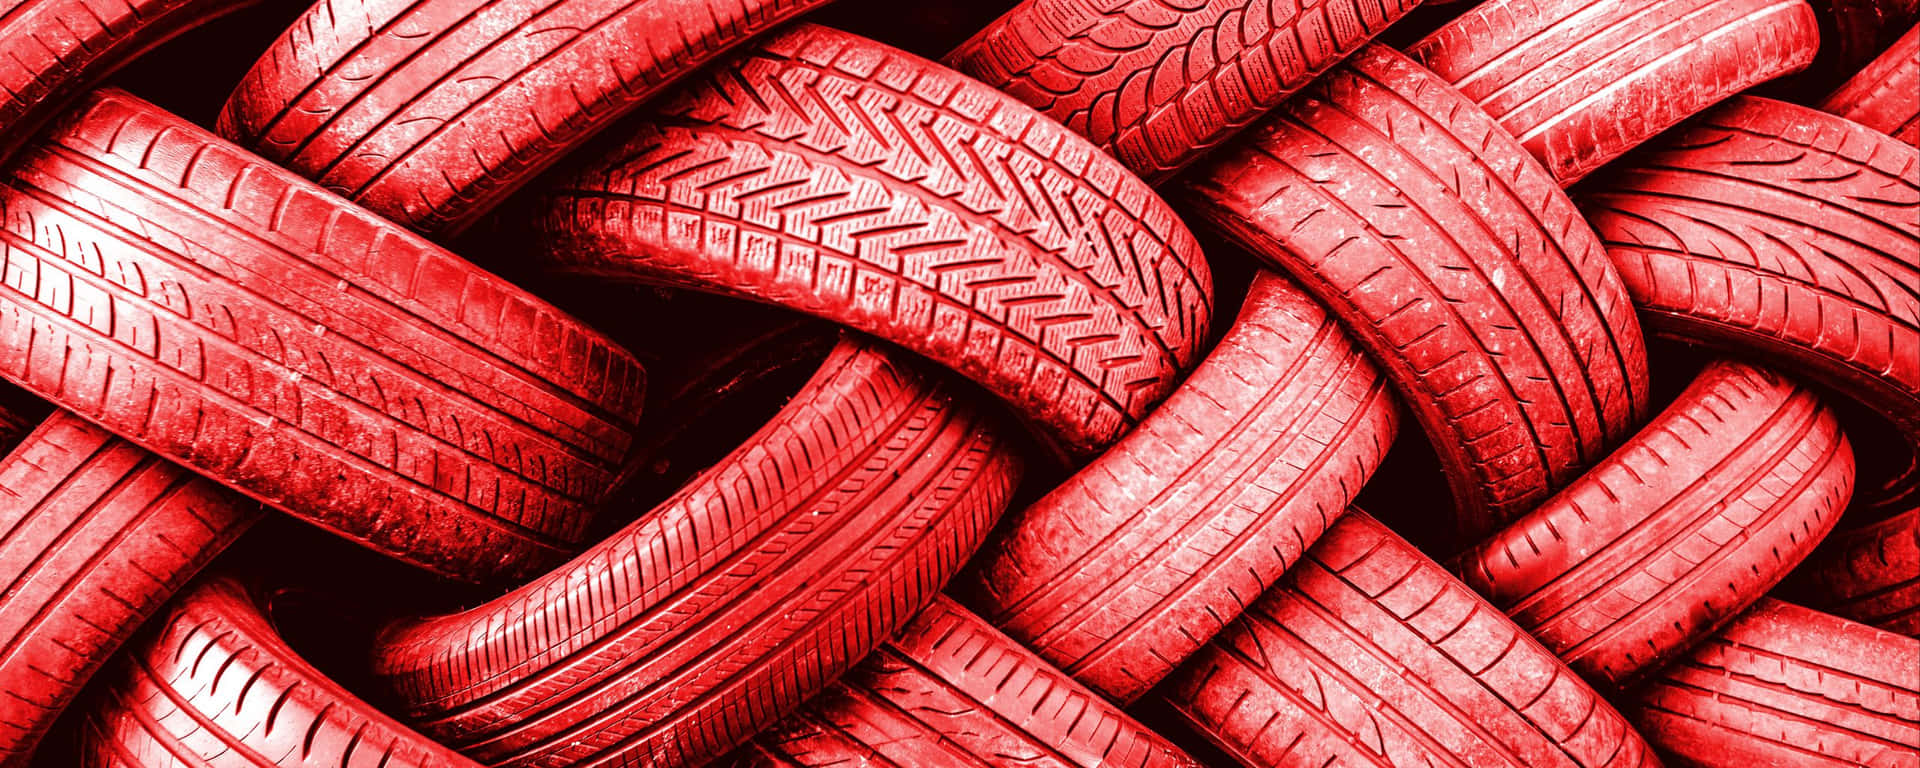 Painted Wheel Tires Red Ultra Wide HD Wallpaper